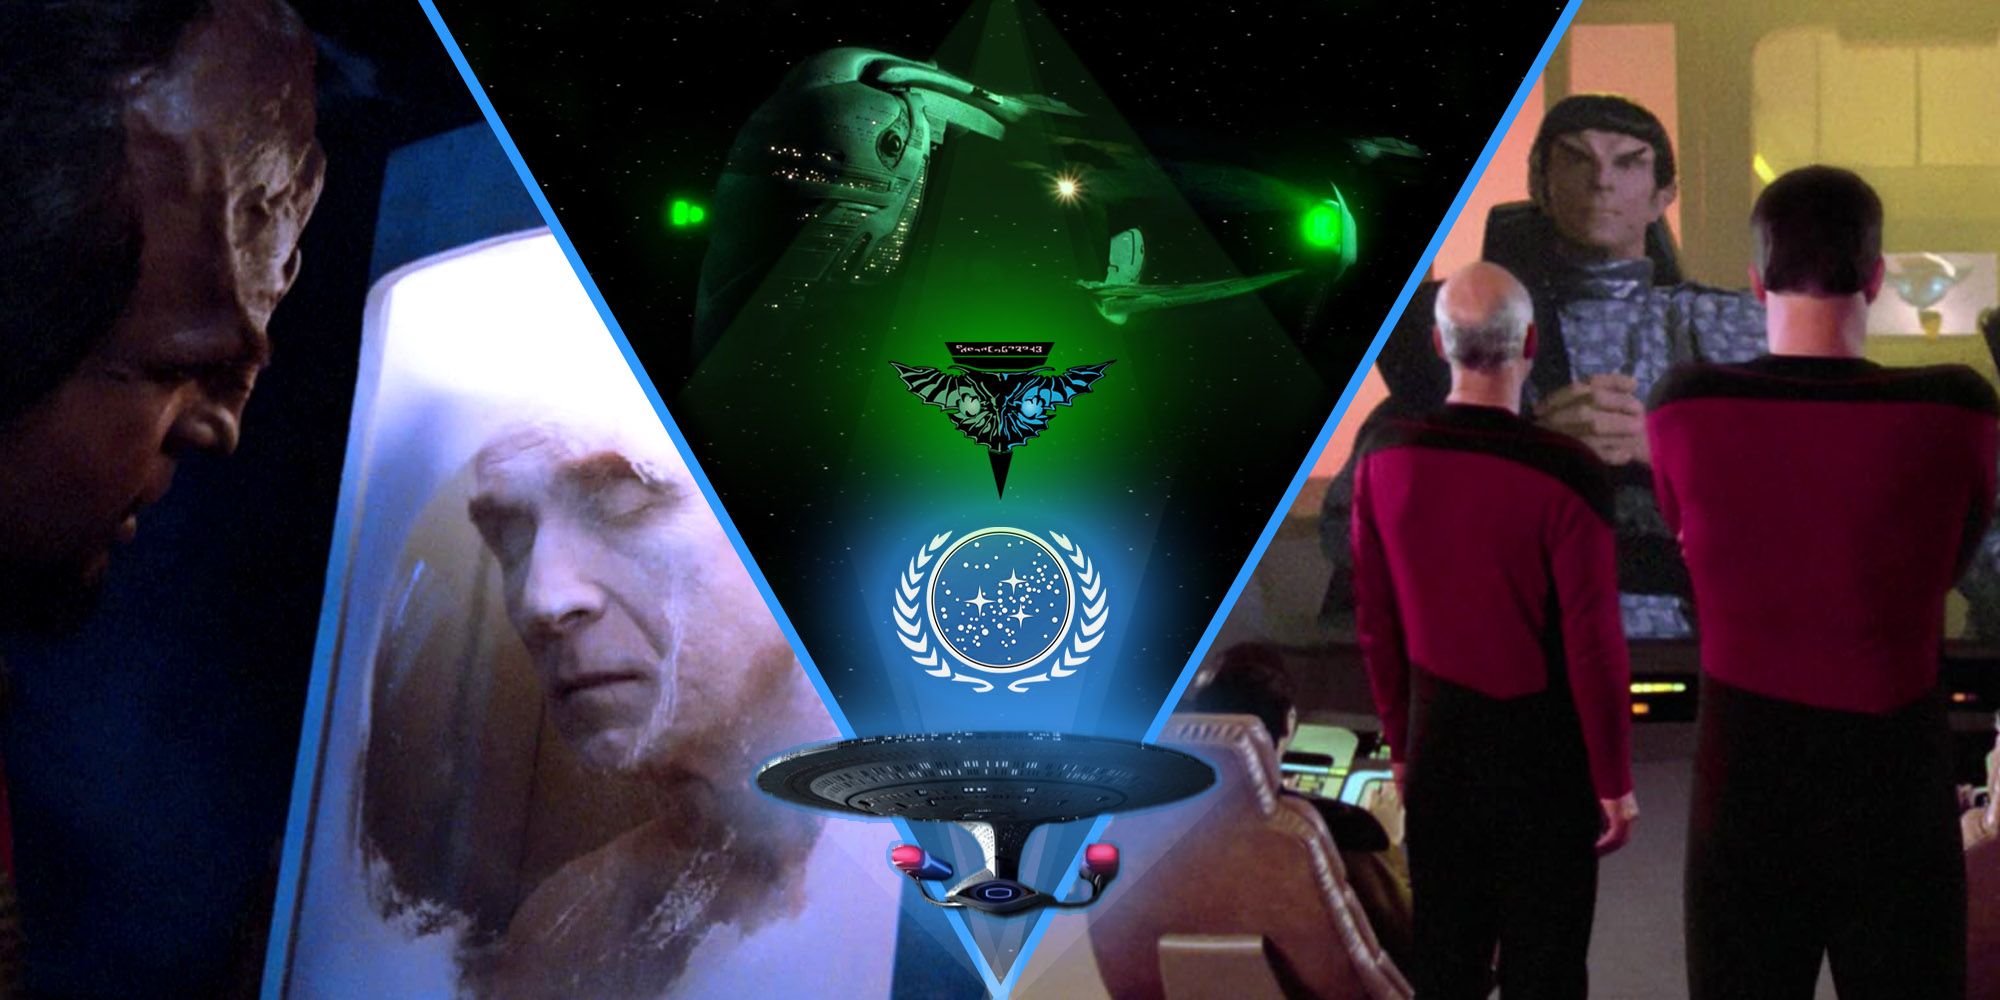 Star Trek The Next Generation Season One Finale The Neutral Zone with a Romulan meeting